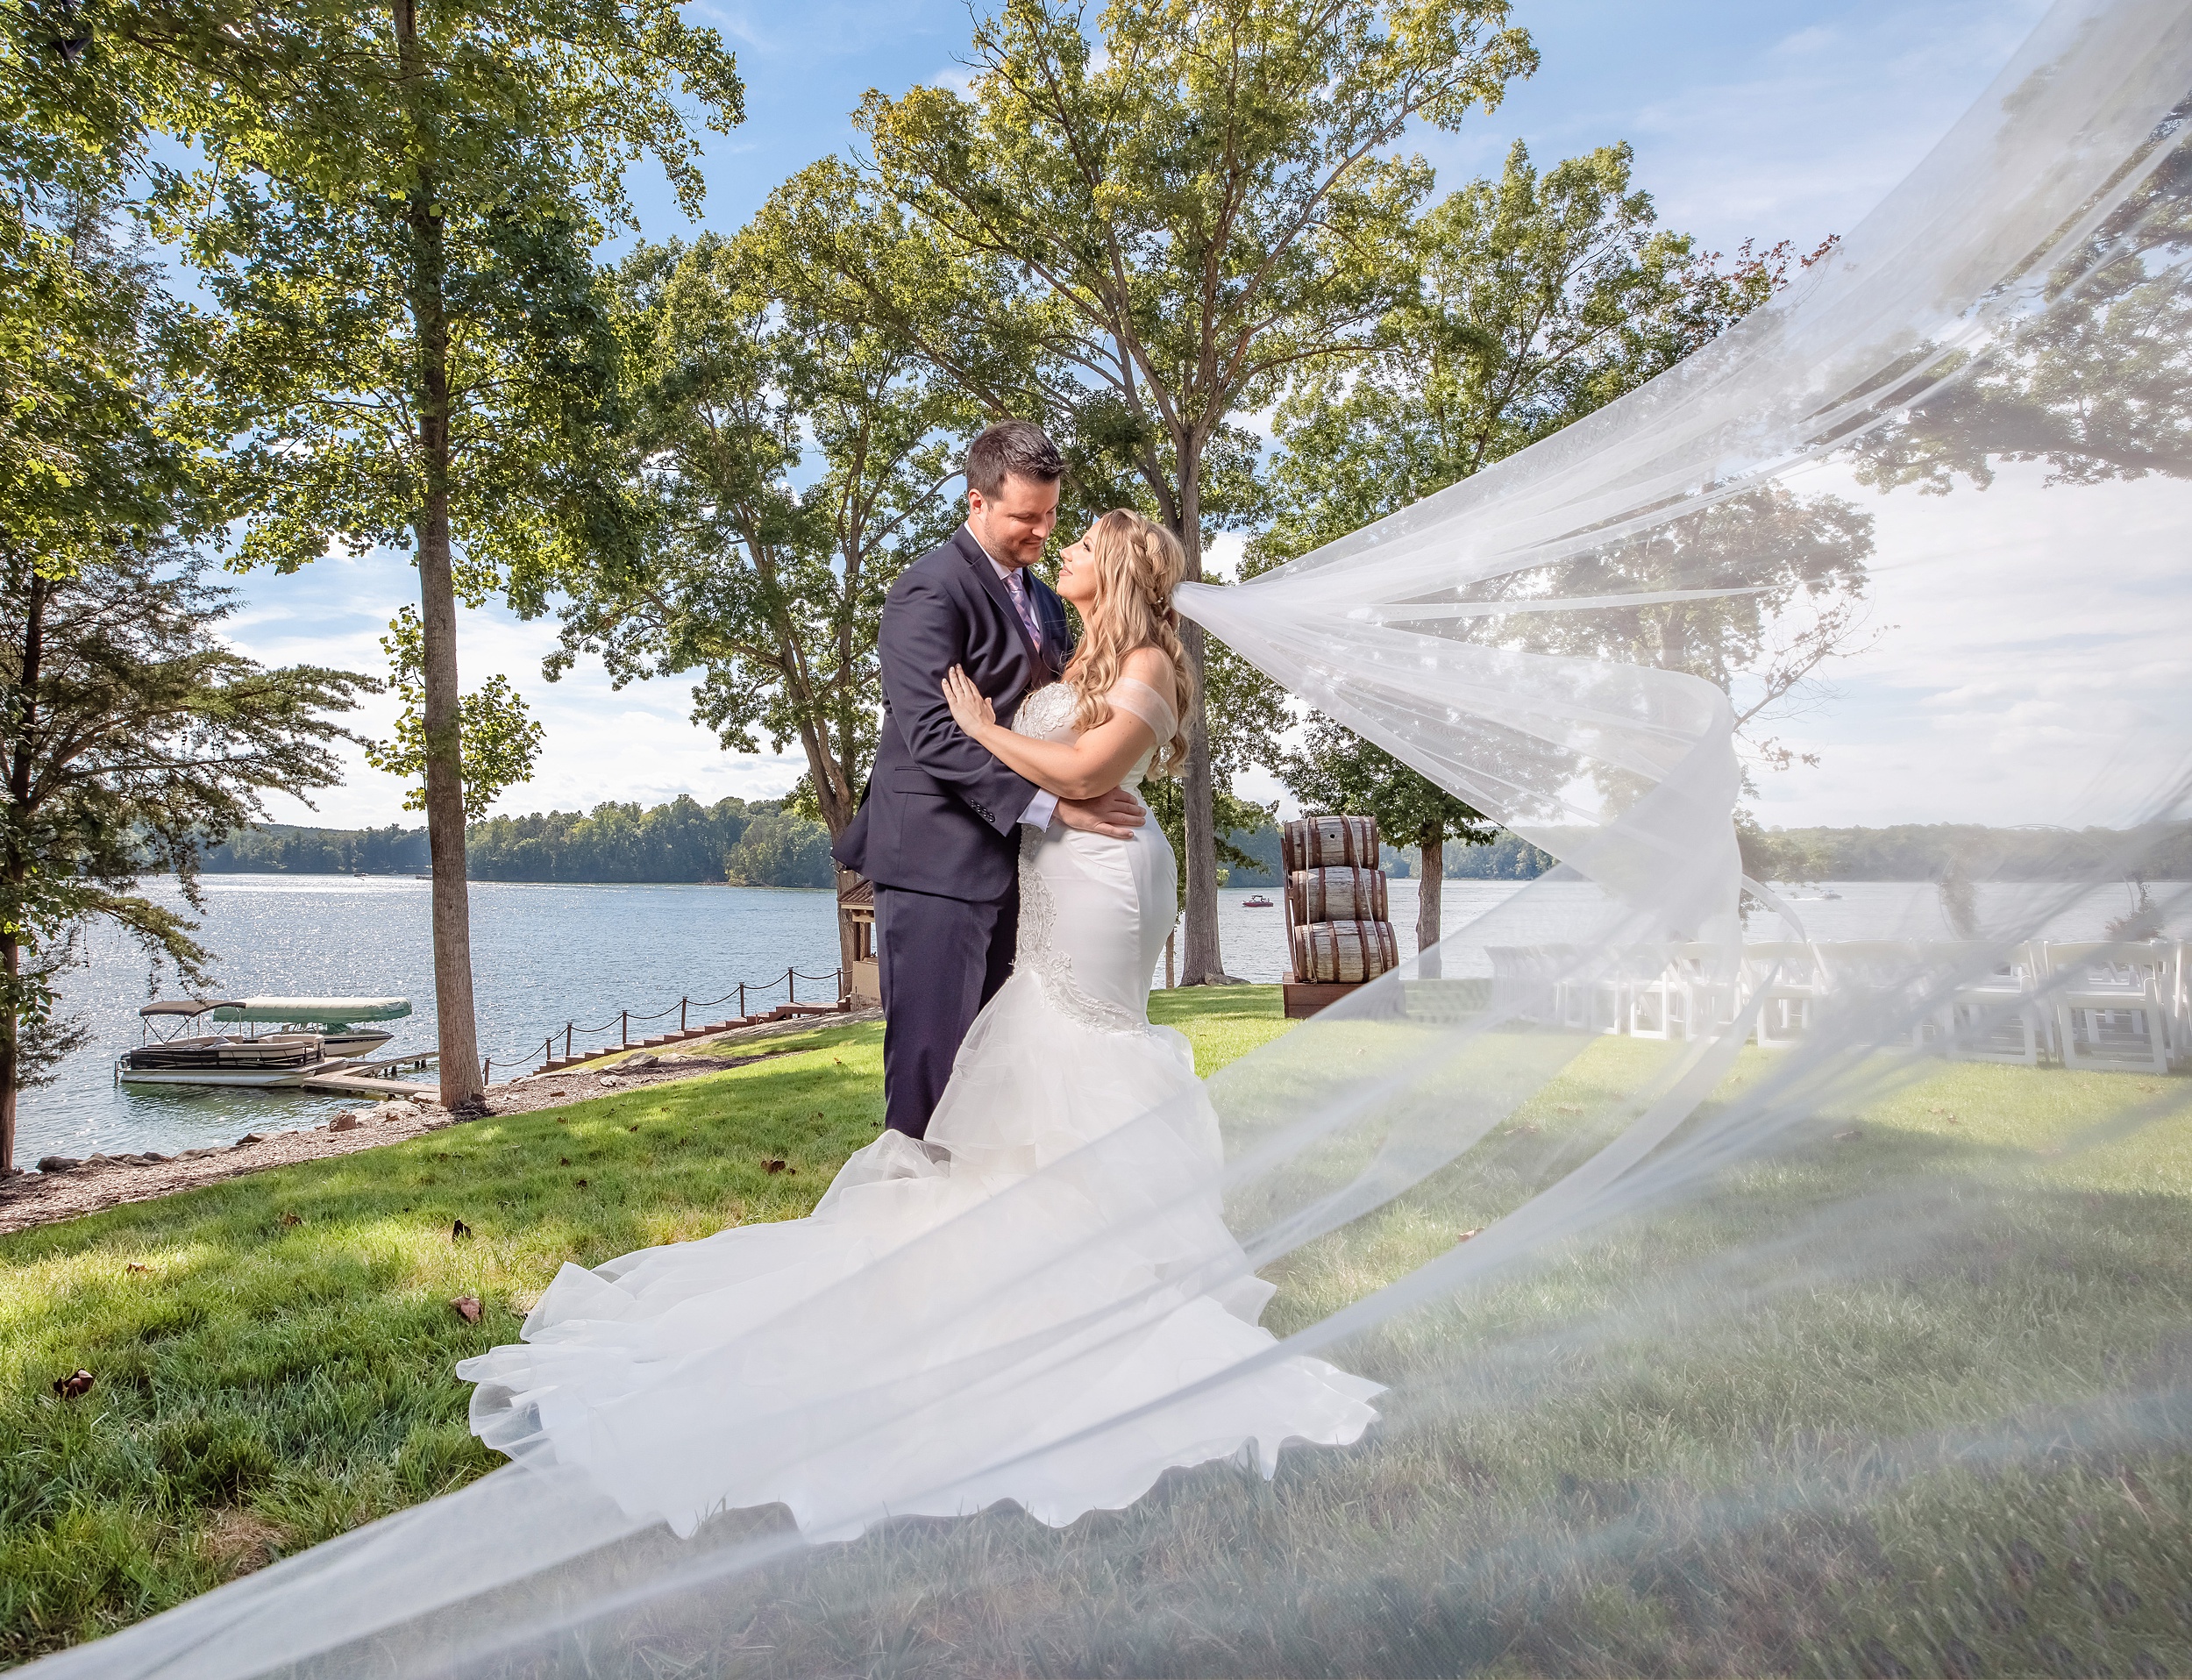 Newlyweds share an intimate waterfront moment as the veil flows in the wind around them